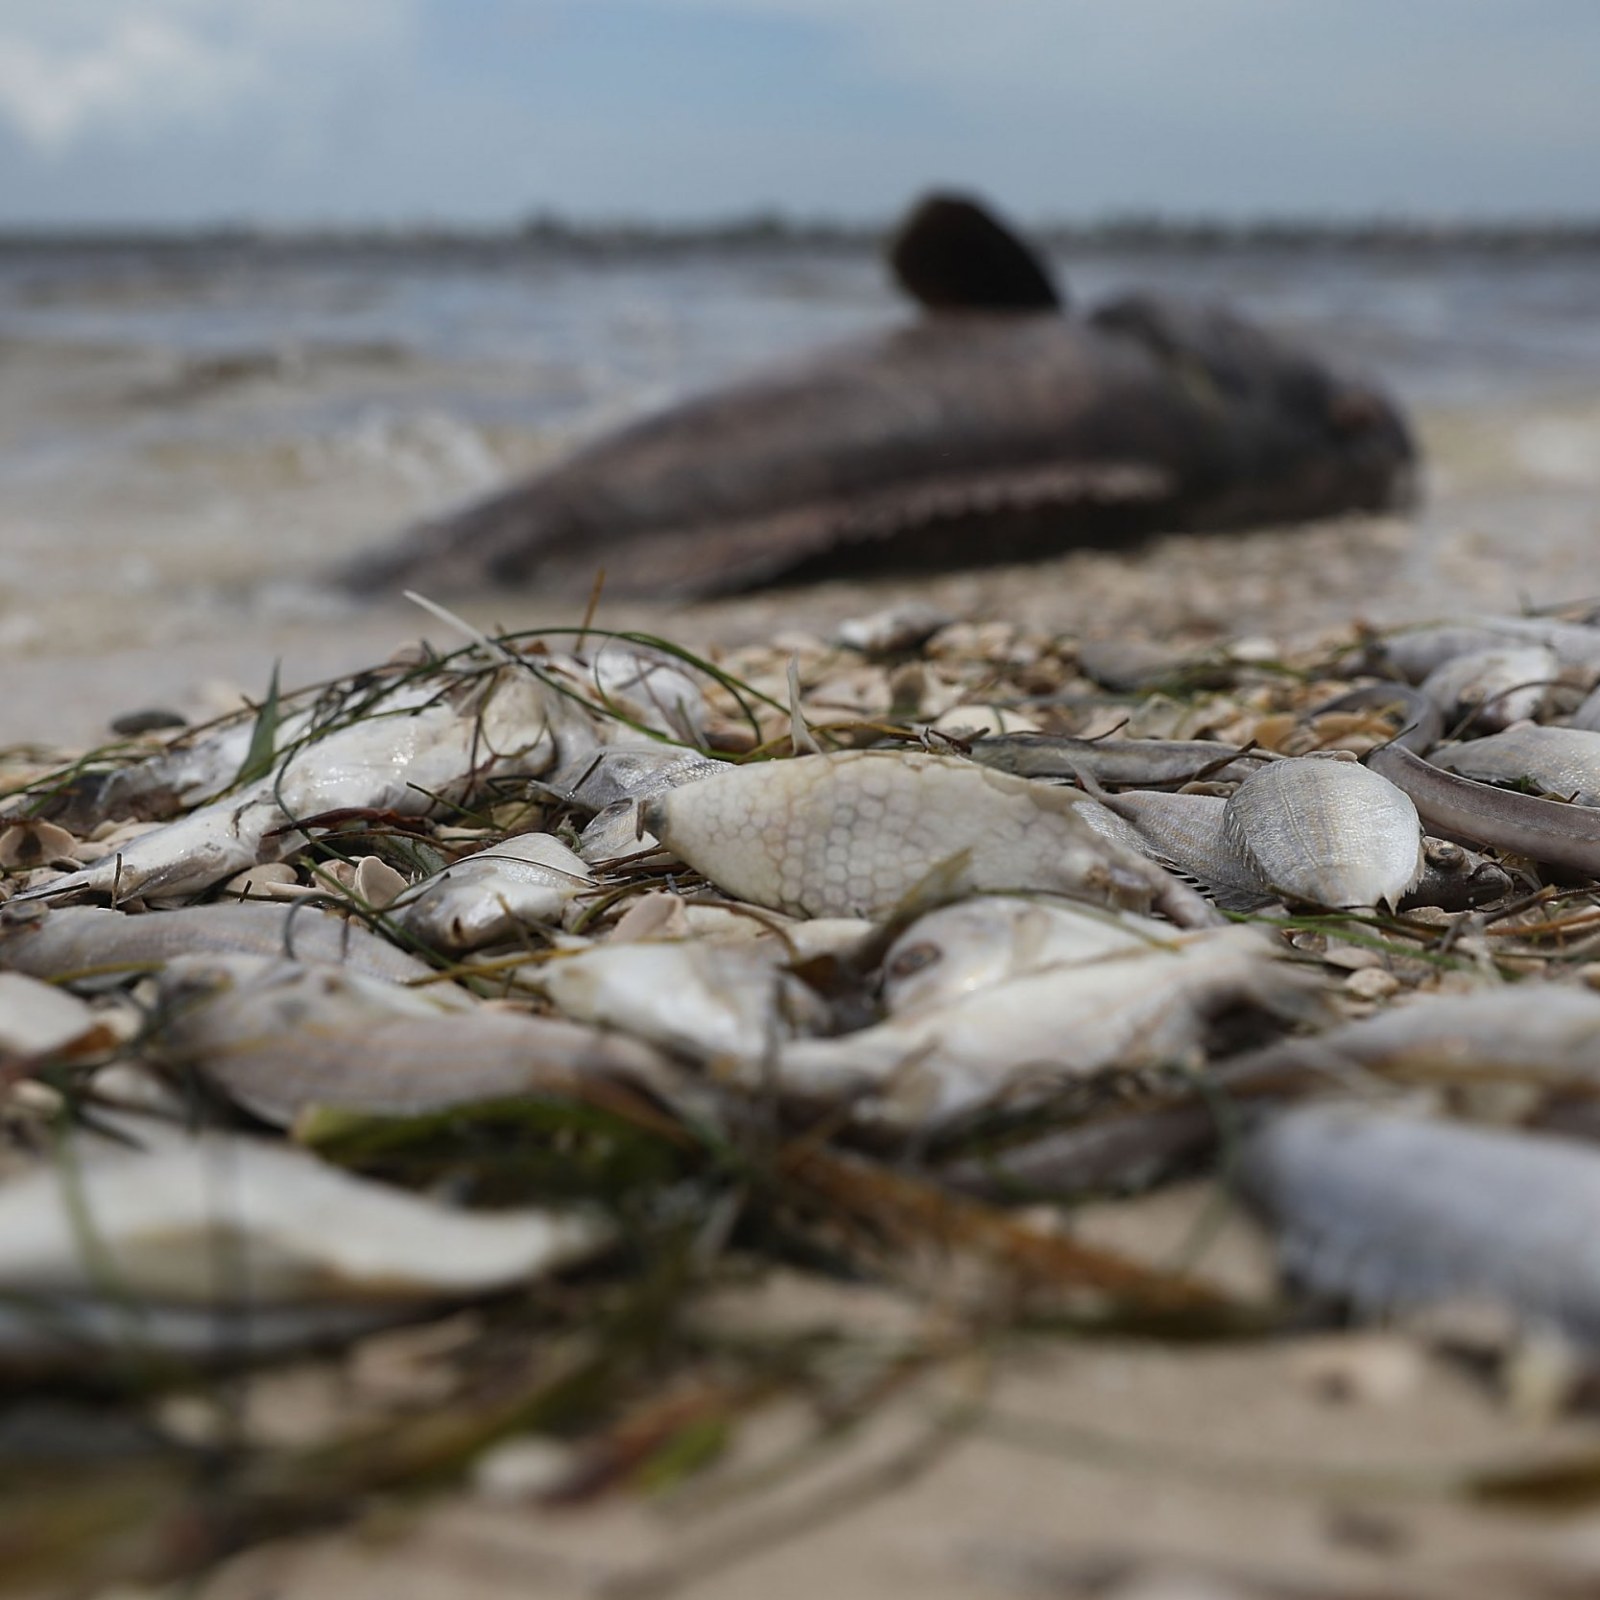 Florida Red Tide's Toxic Algae and Dead Animals: Destruction Behind State  of Emergency in Pictures